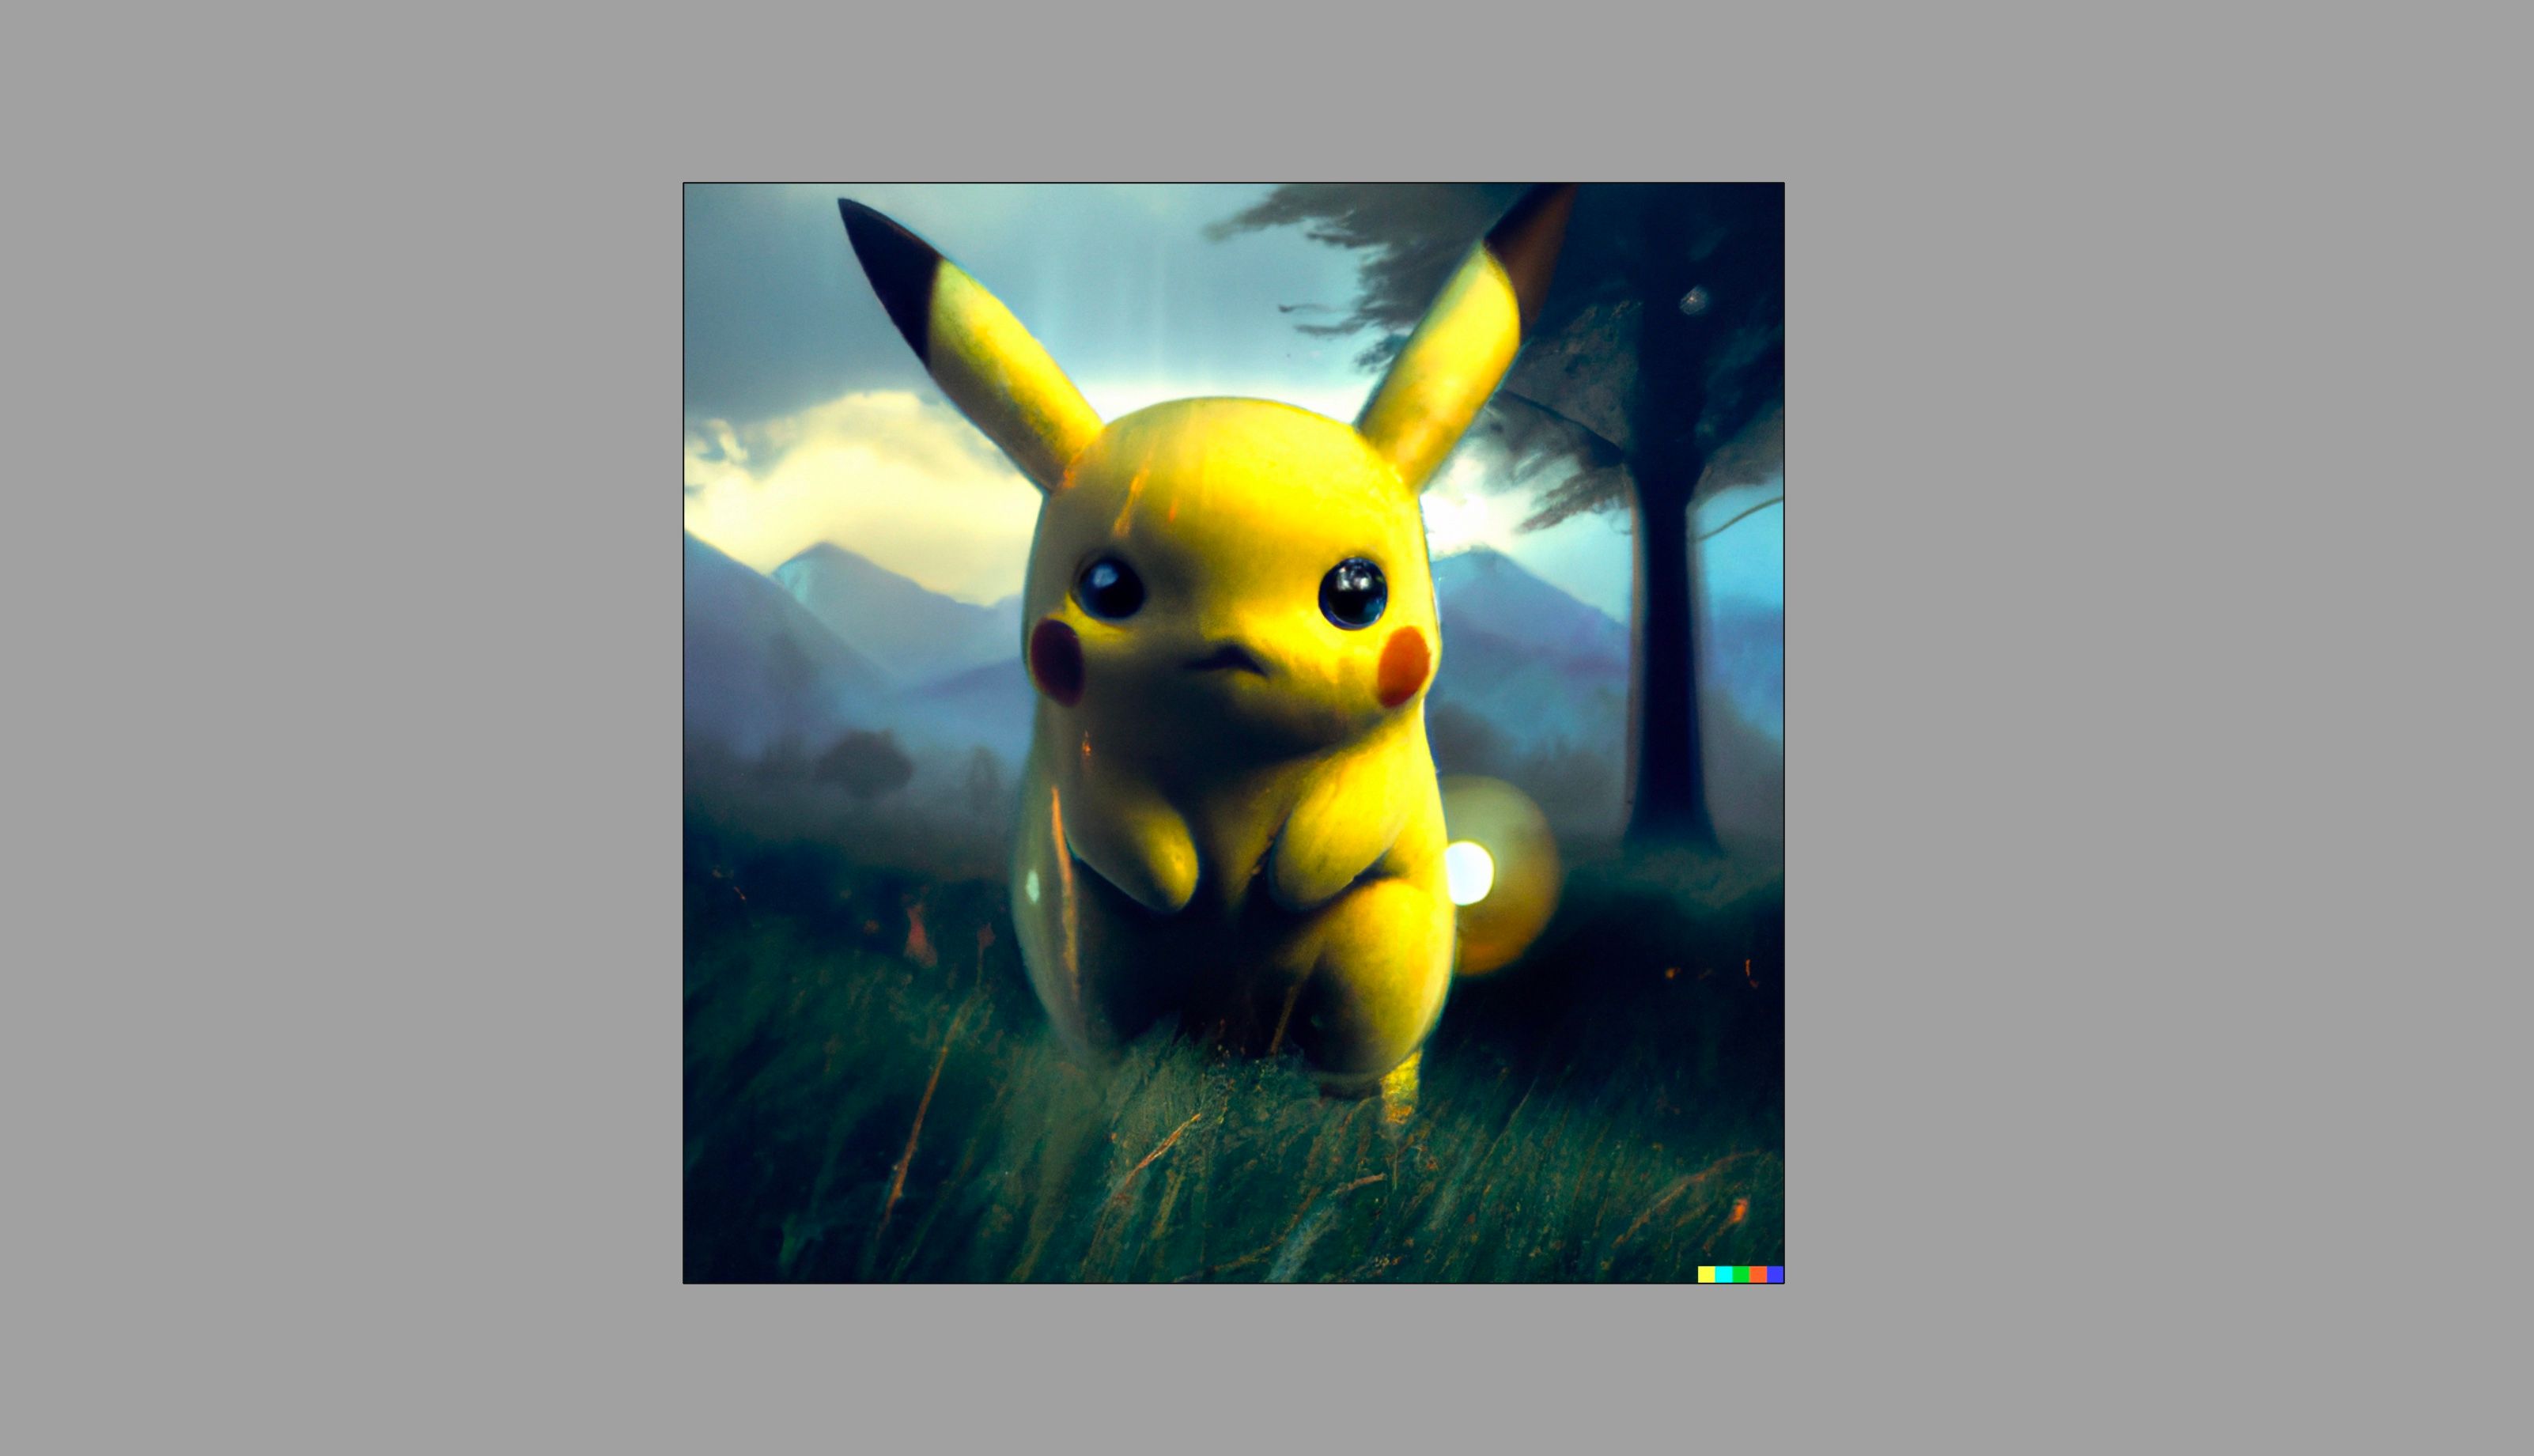 Digital art of Pikachu generated with Dall-E